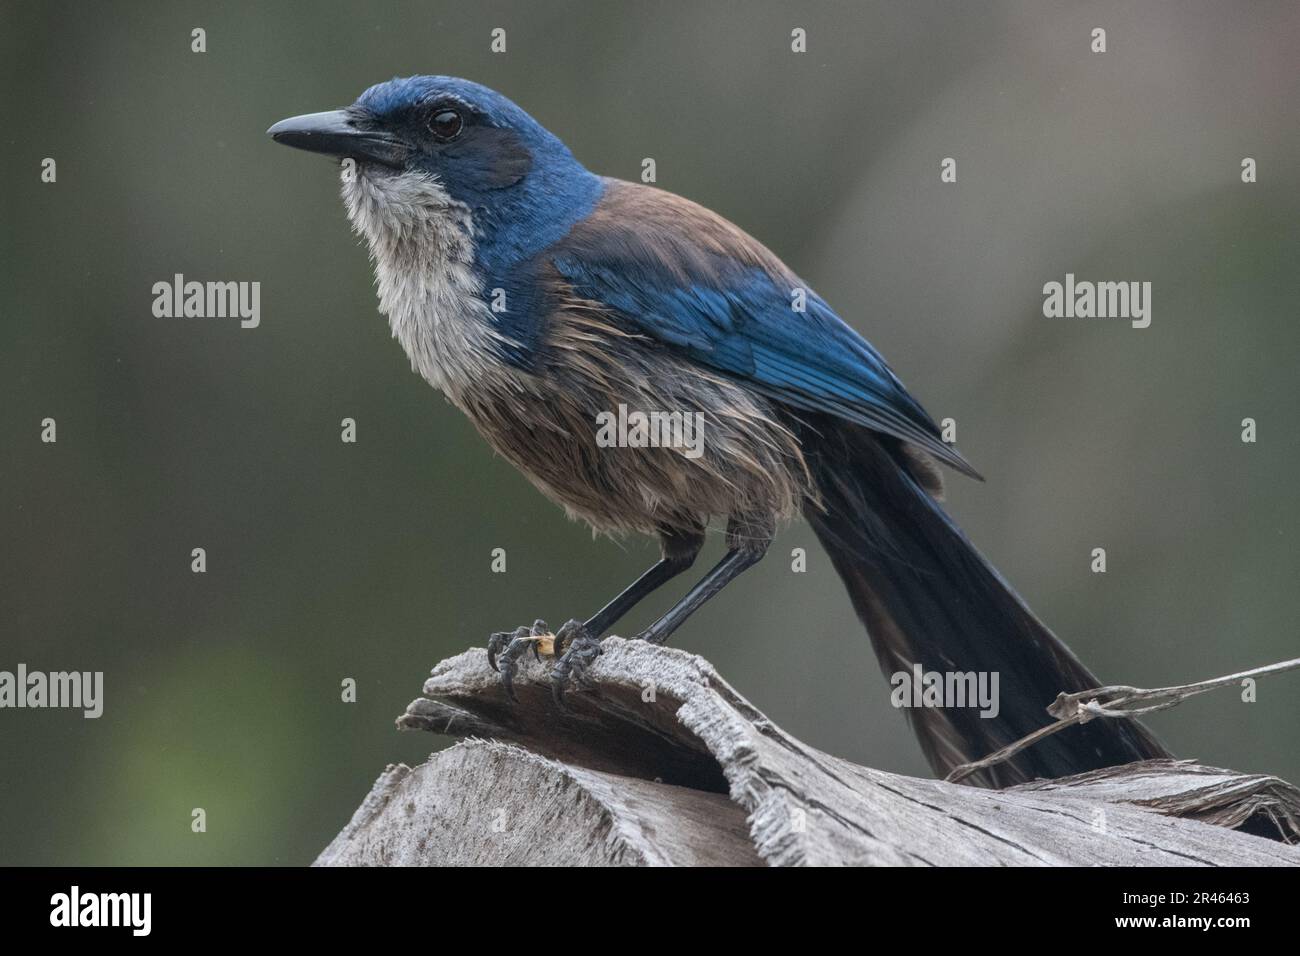 Island scrub jay, Aphelocoma insularis, a corvid bird species that is endemic to Santa Cruz Island in the Channel islands National park in California. Stock Photo